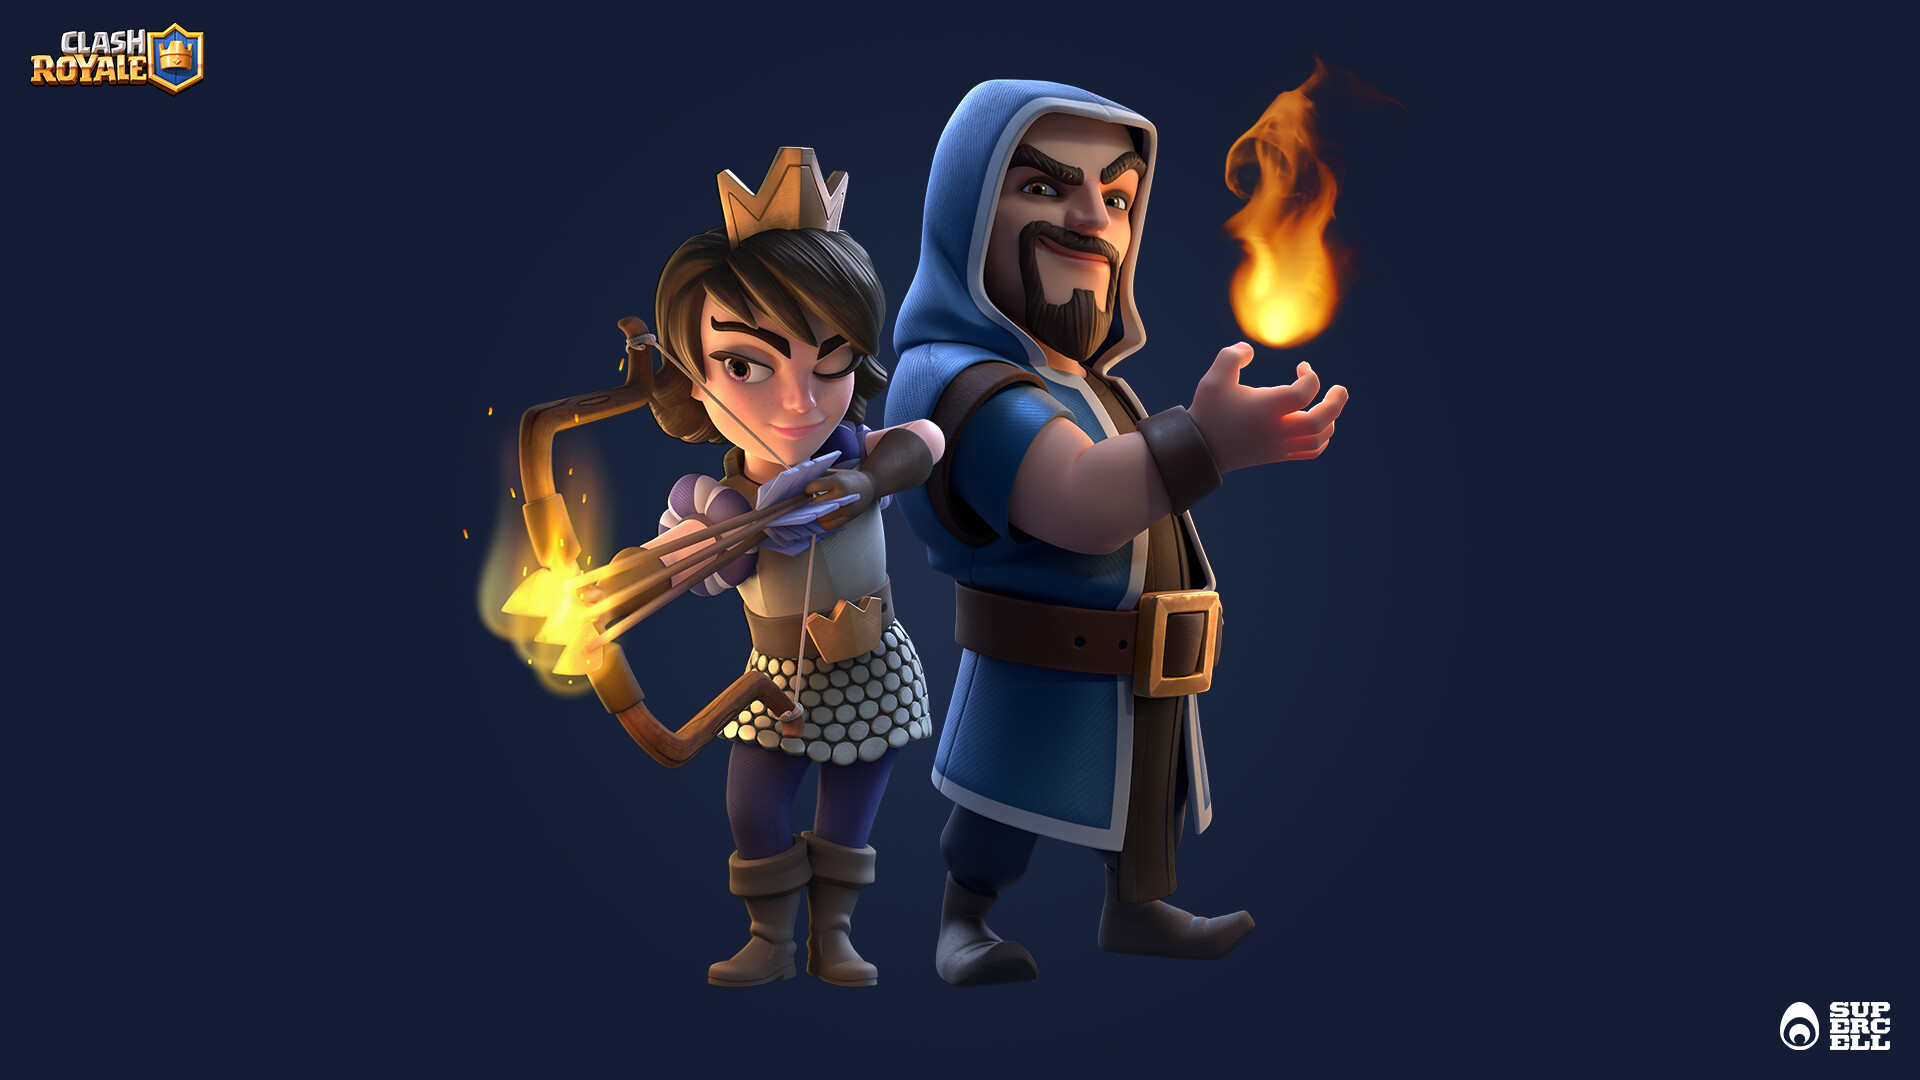 Clash Royale - Princess and Wizard. 